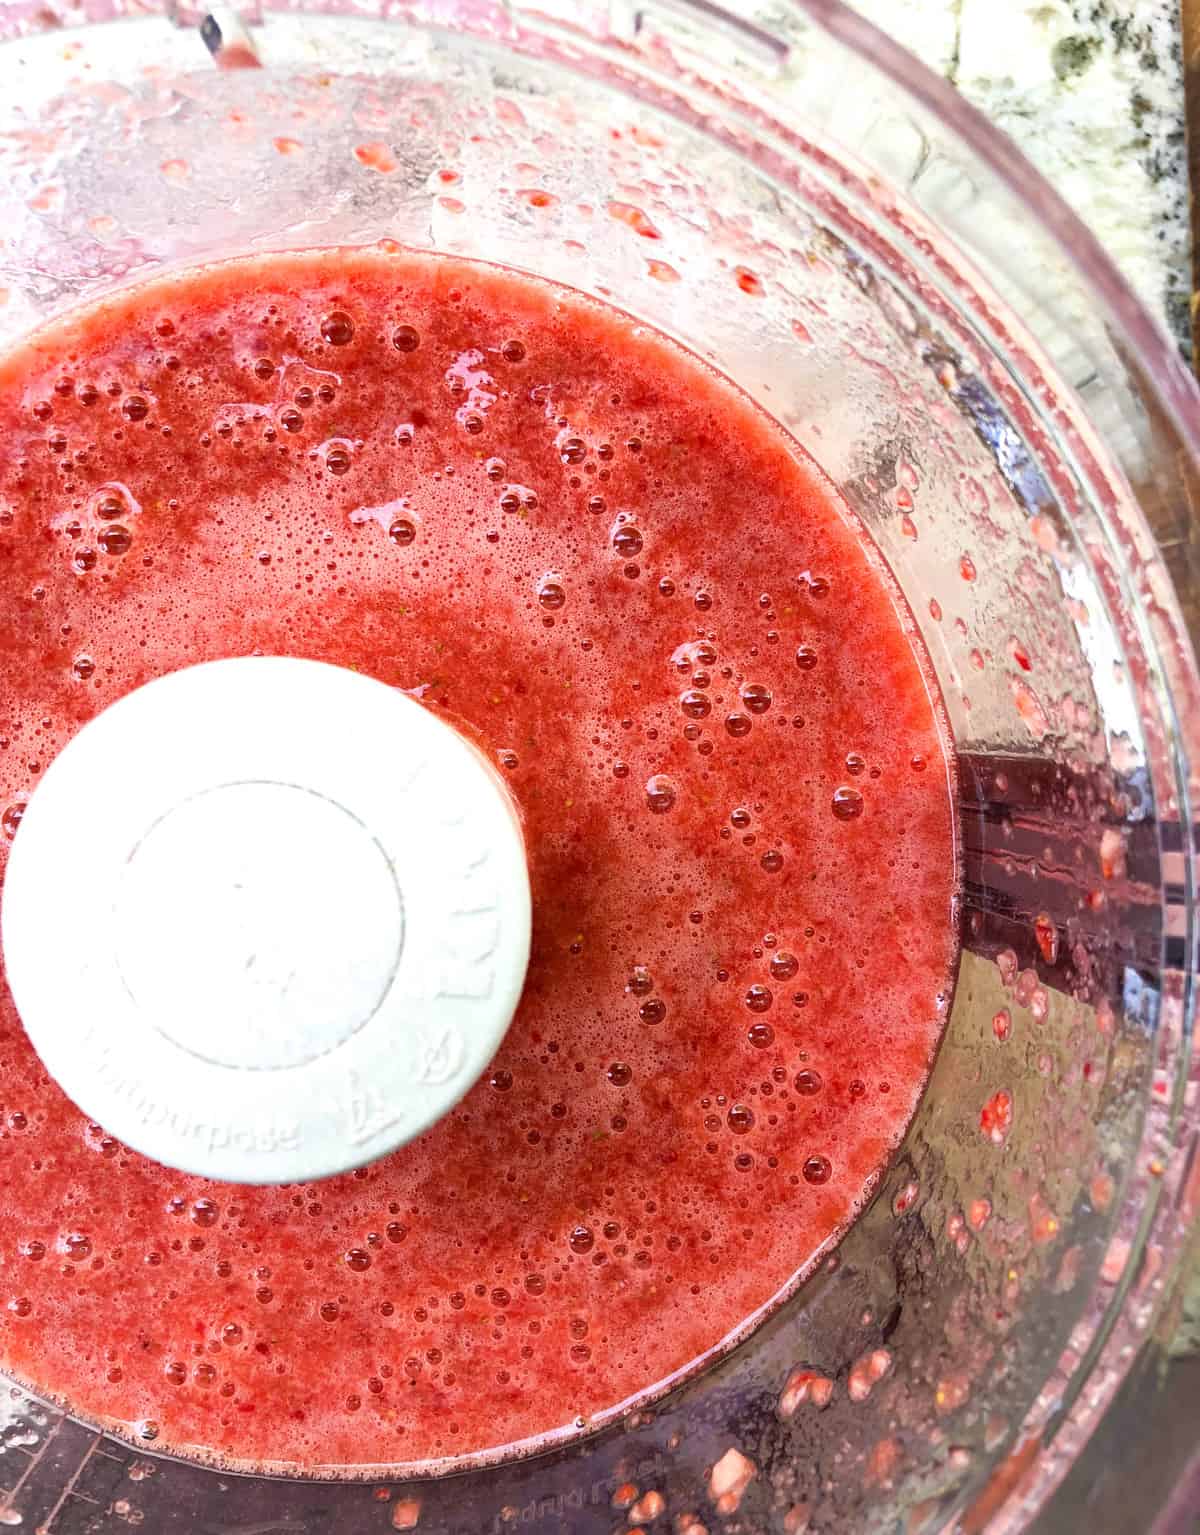 Blended strawberry and lime juice